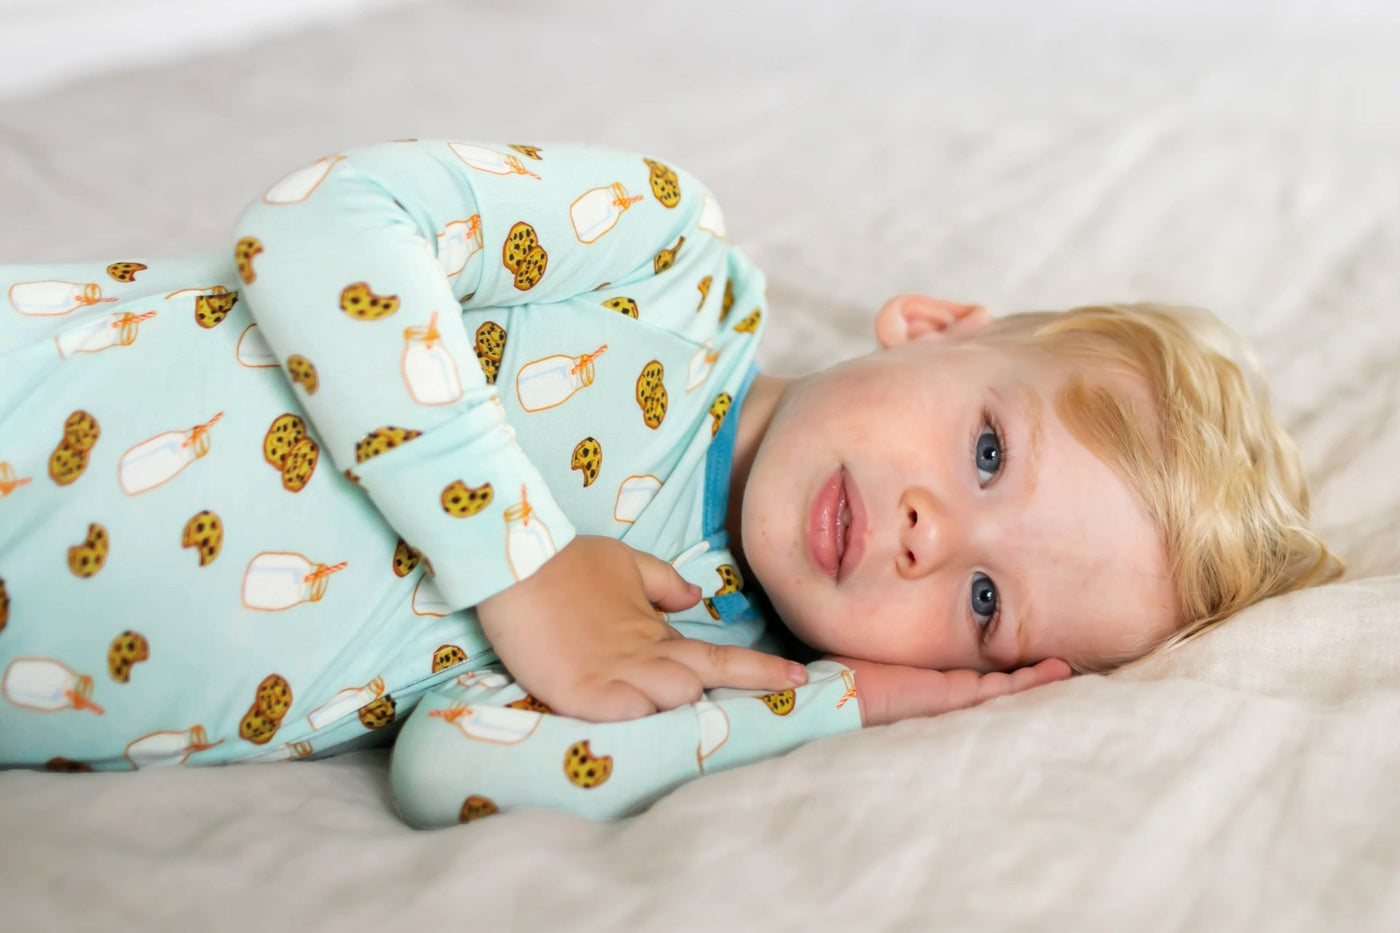 Frosted Blue Milk & Cookies Coverall (0-24m) - Free Birdees